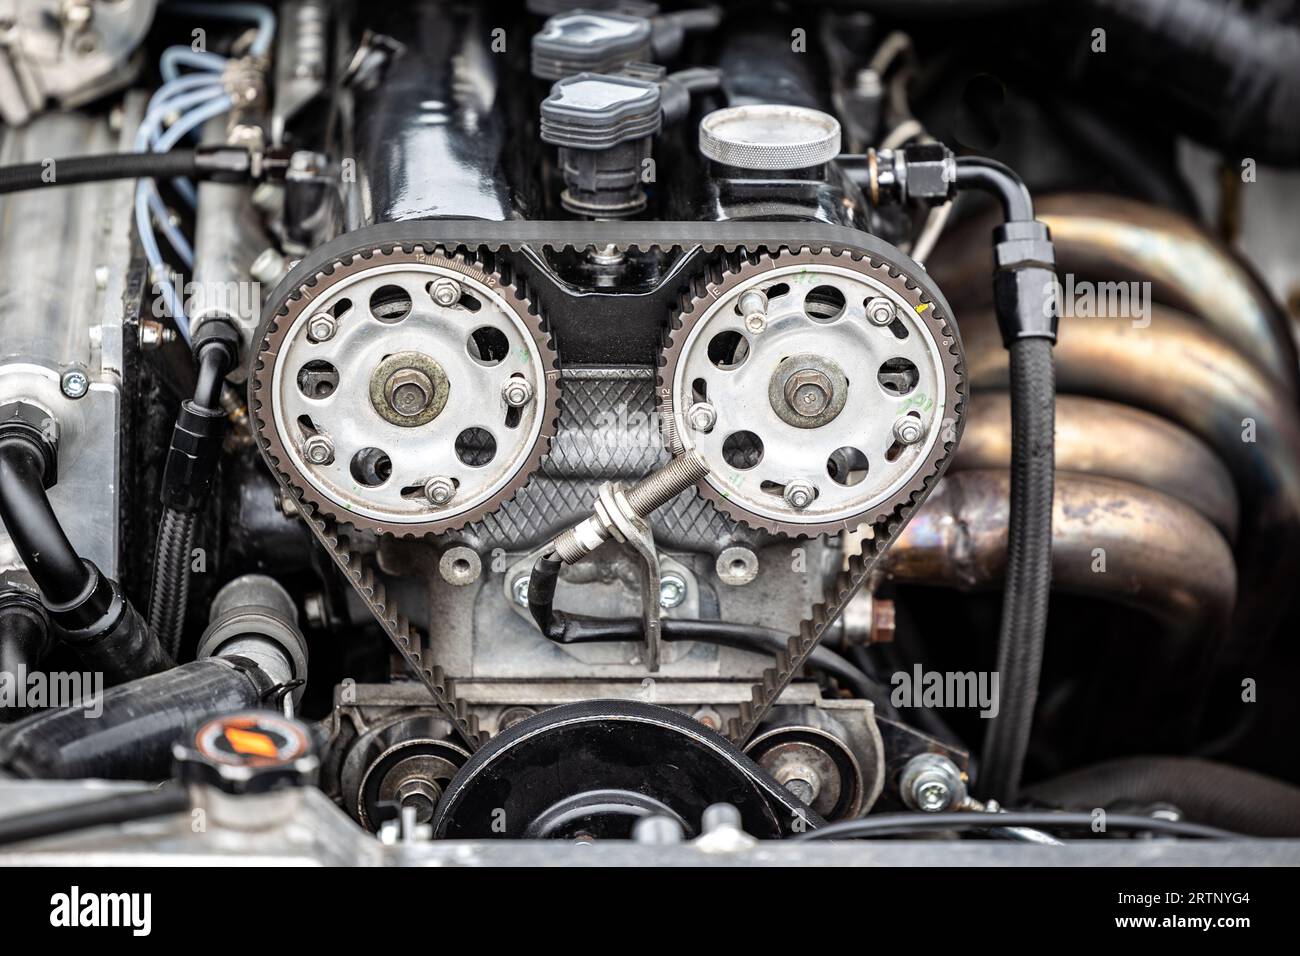 Twin cam engine car with pulley wheels and cam belt in view of engine bay. Stock Photo